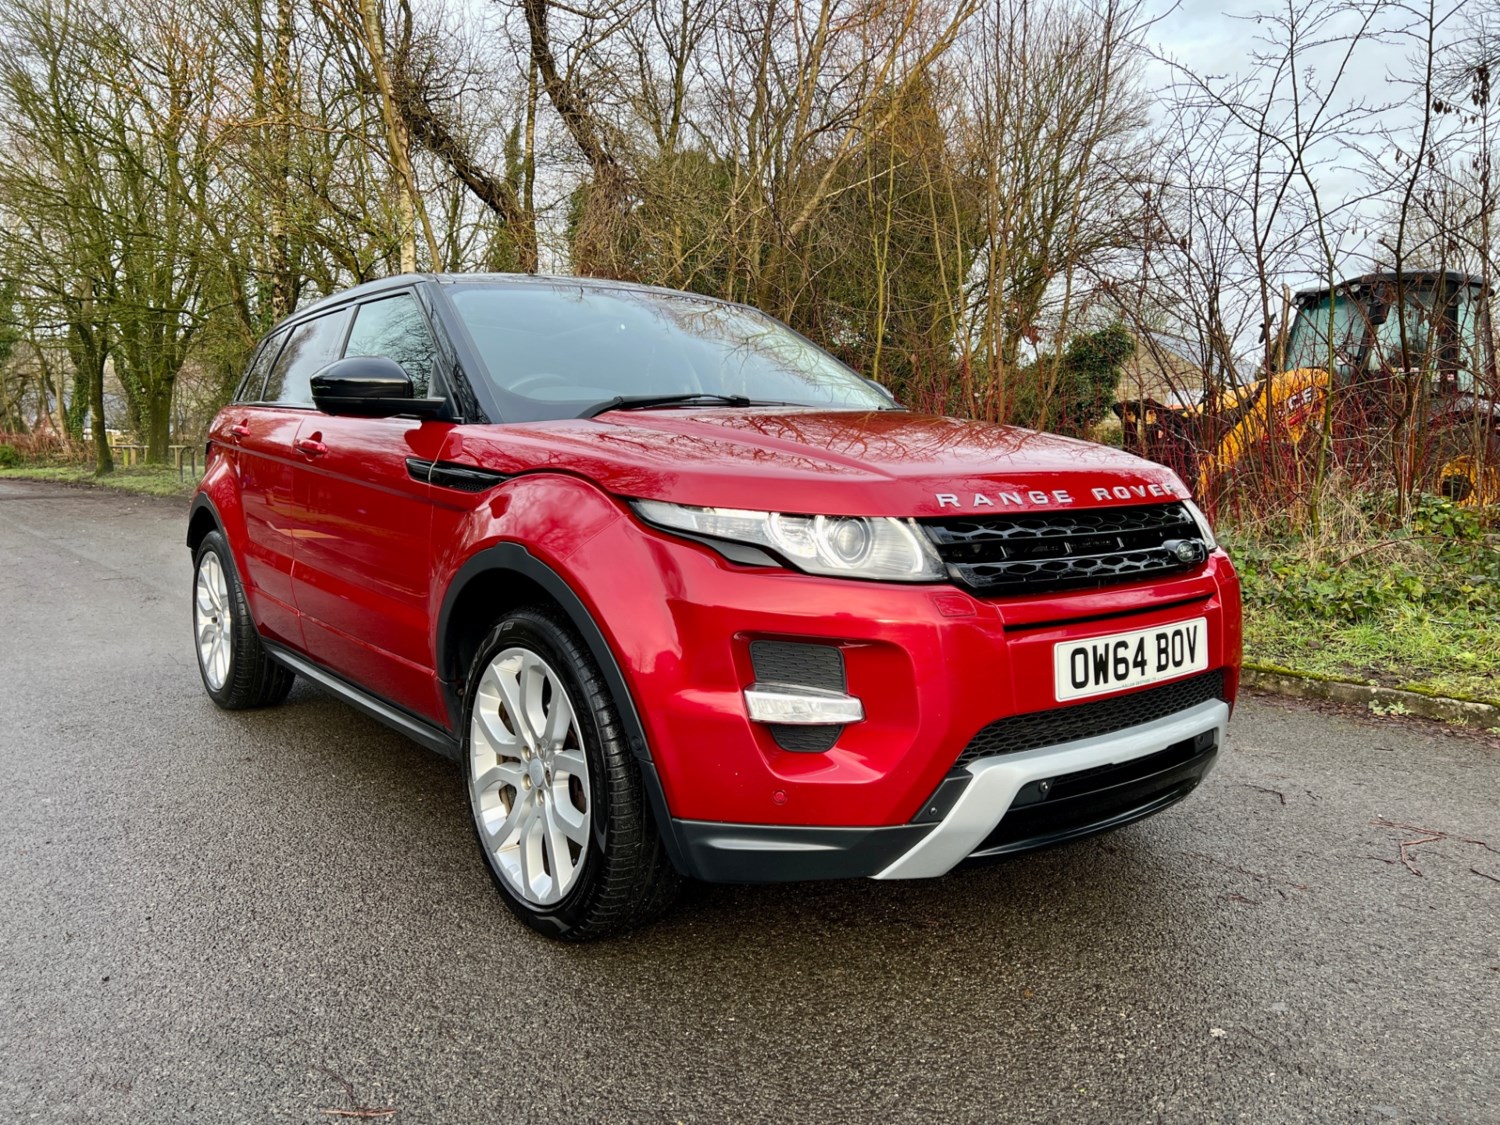 2015 (64) Land Rover Range Rover Evoque 2.2 SD4 Dynamic 5dr Auto [9] [Lux Pack] For Sale In High Peak, Derbyshire